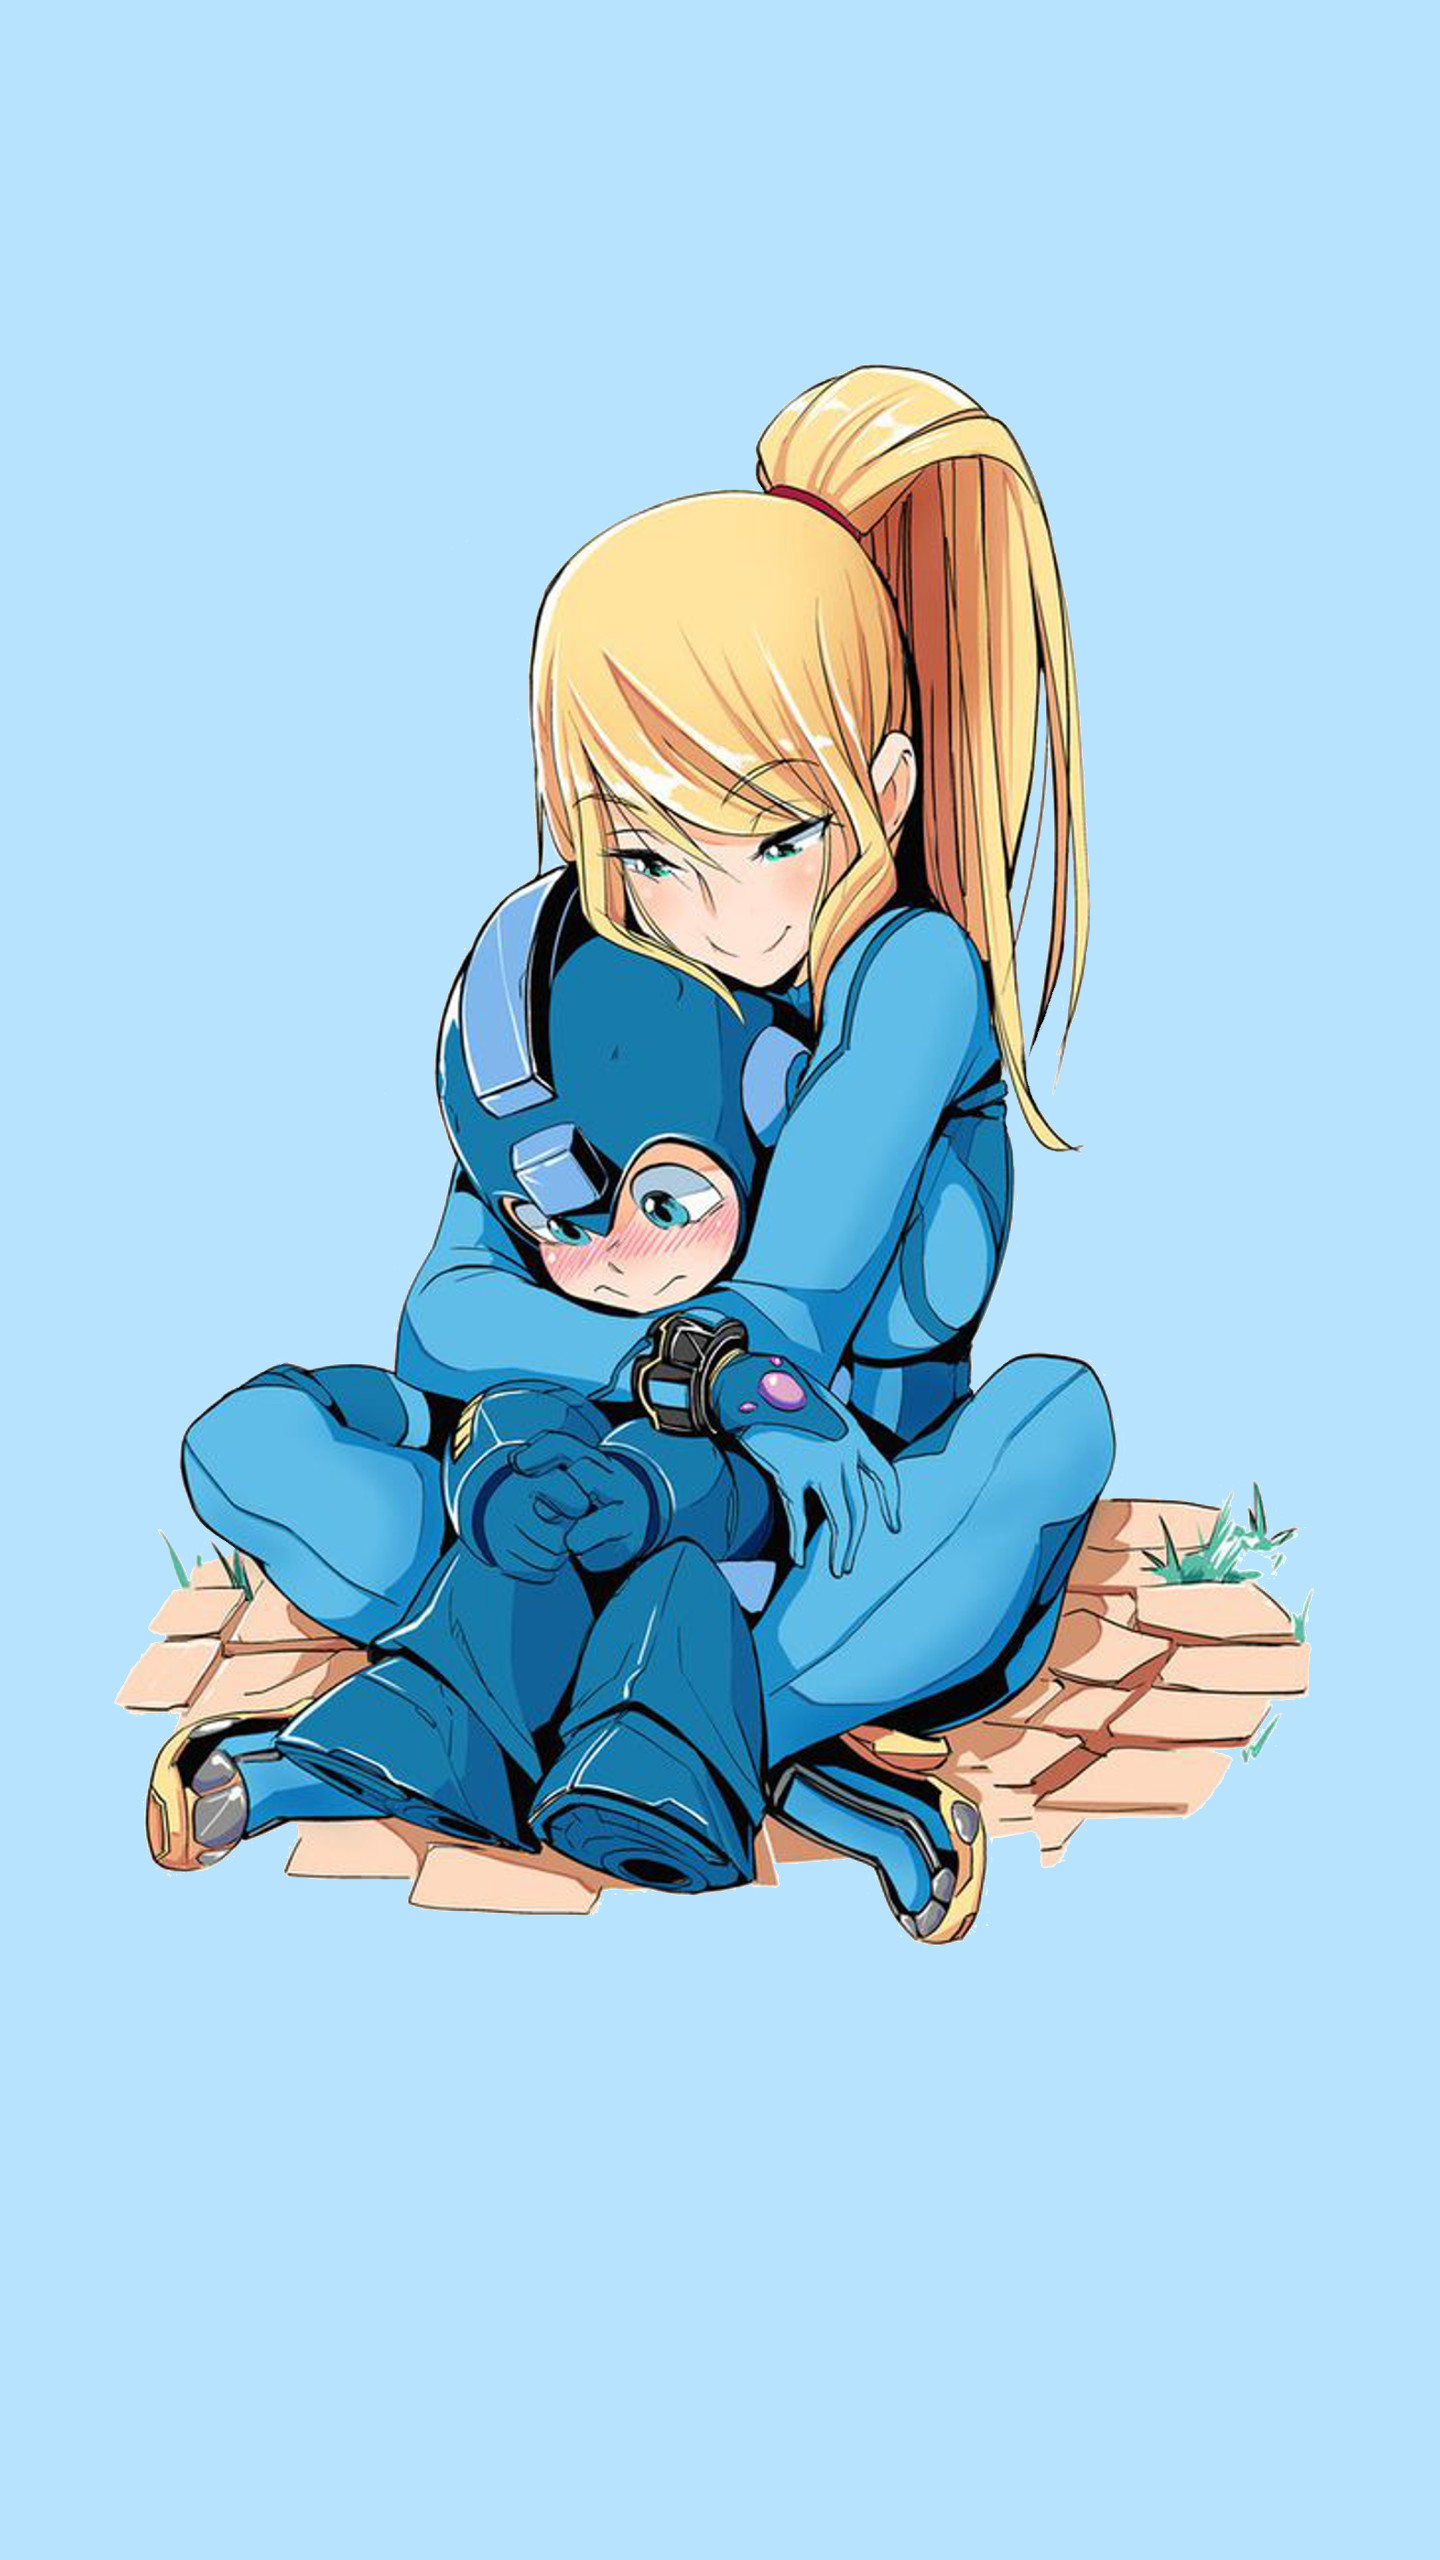 1440x2560 Mega Man and Samus Wallpapers! Computer Wallpaper and a Phone Wallpaper  too! on. Find this Pin and more on Wallpapers  ...